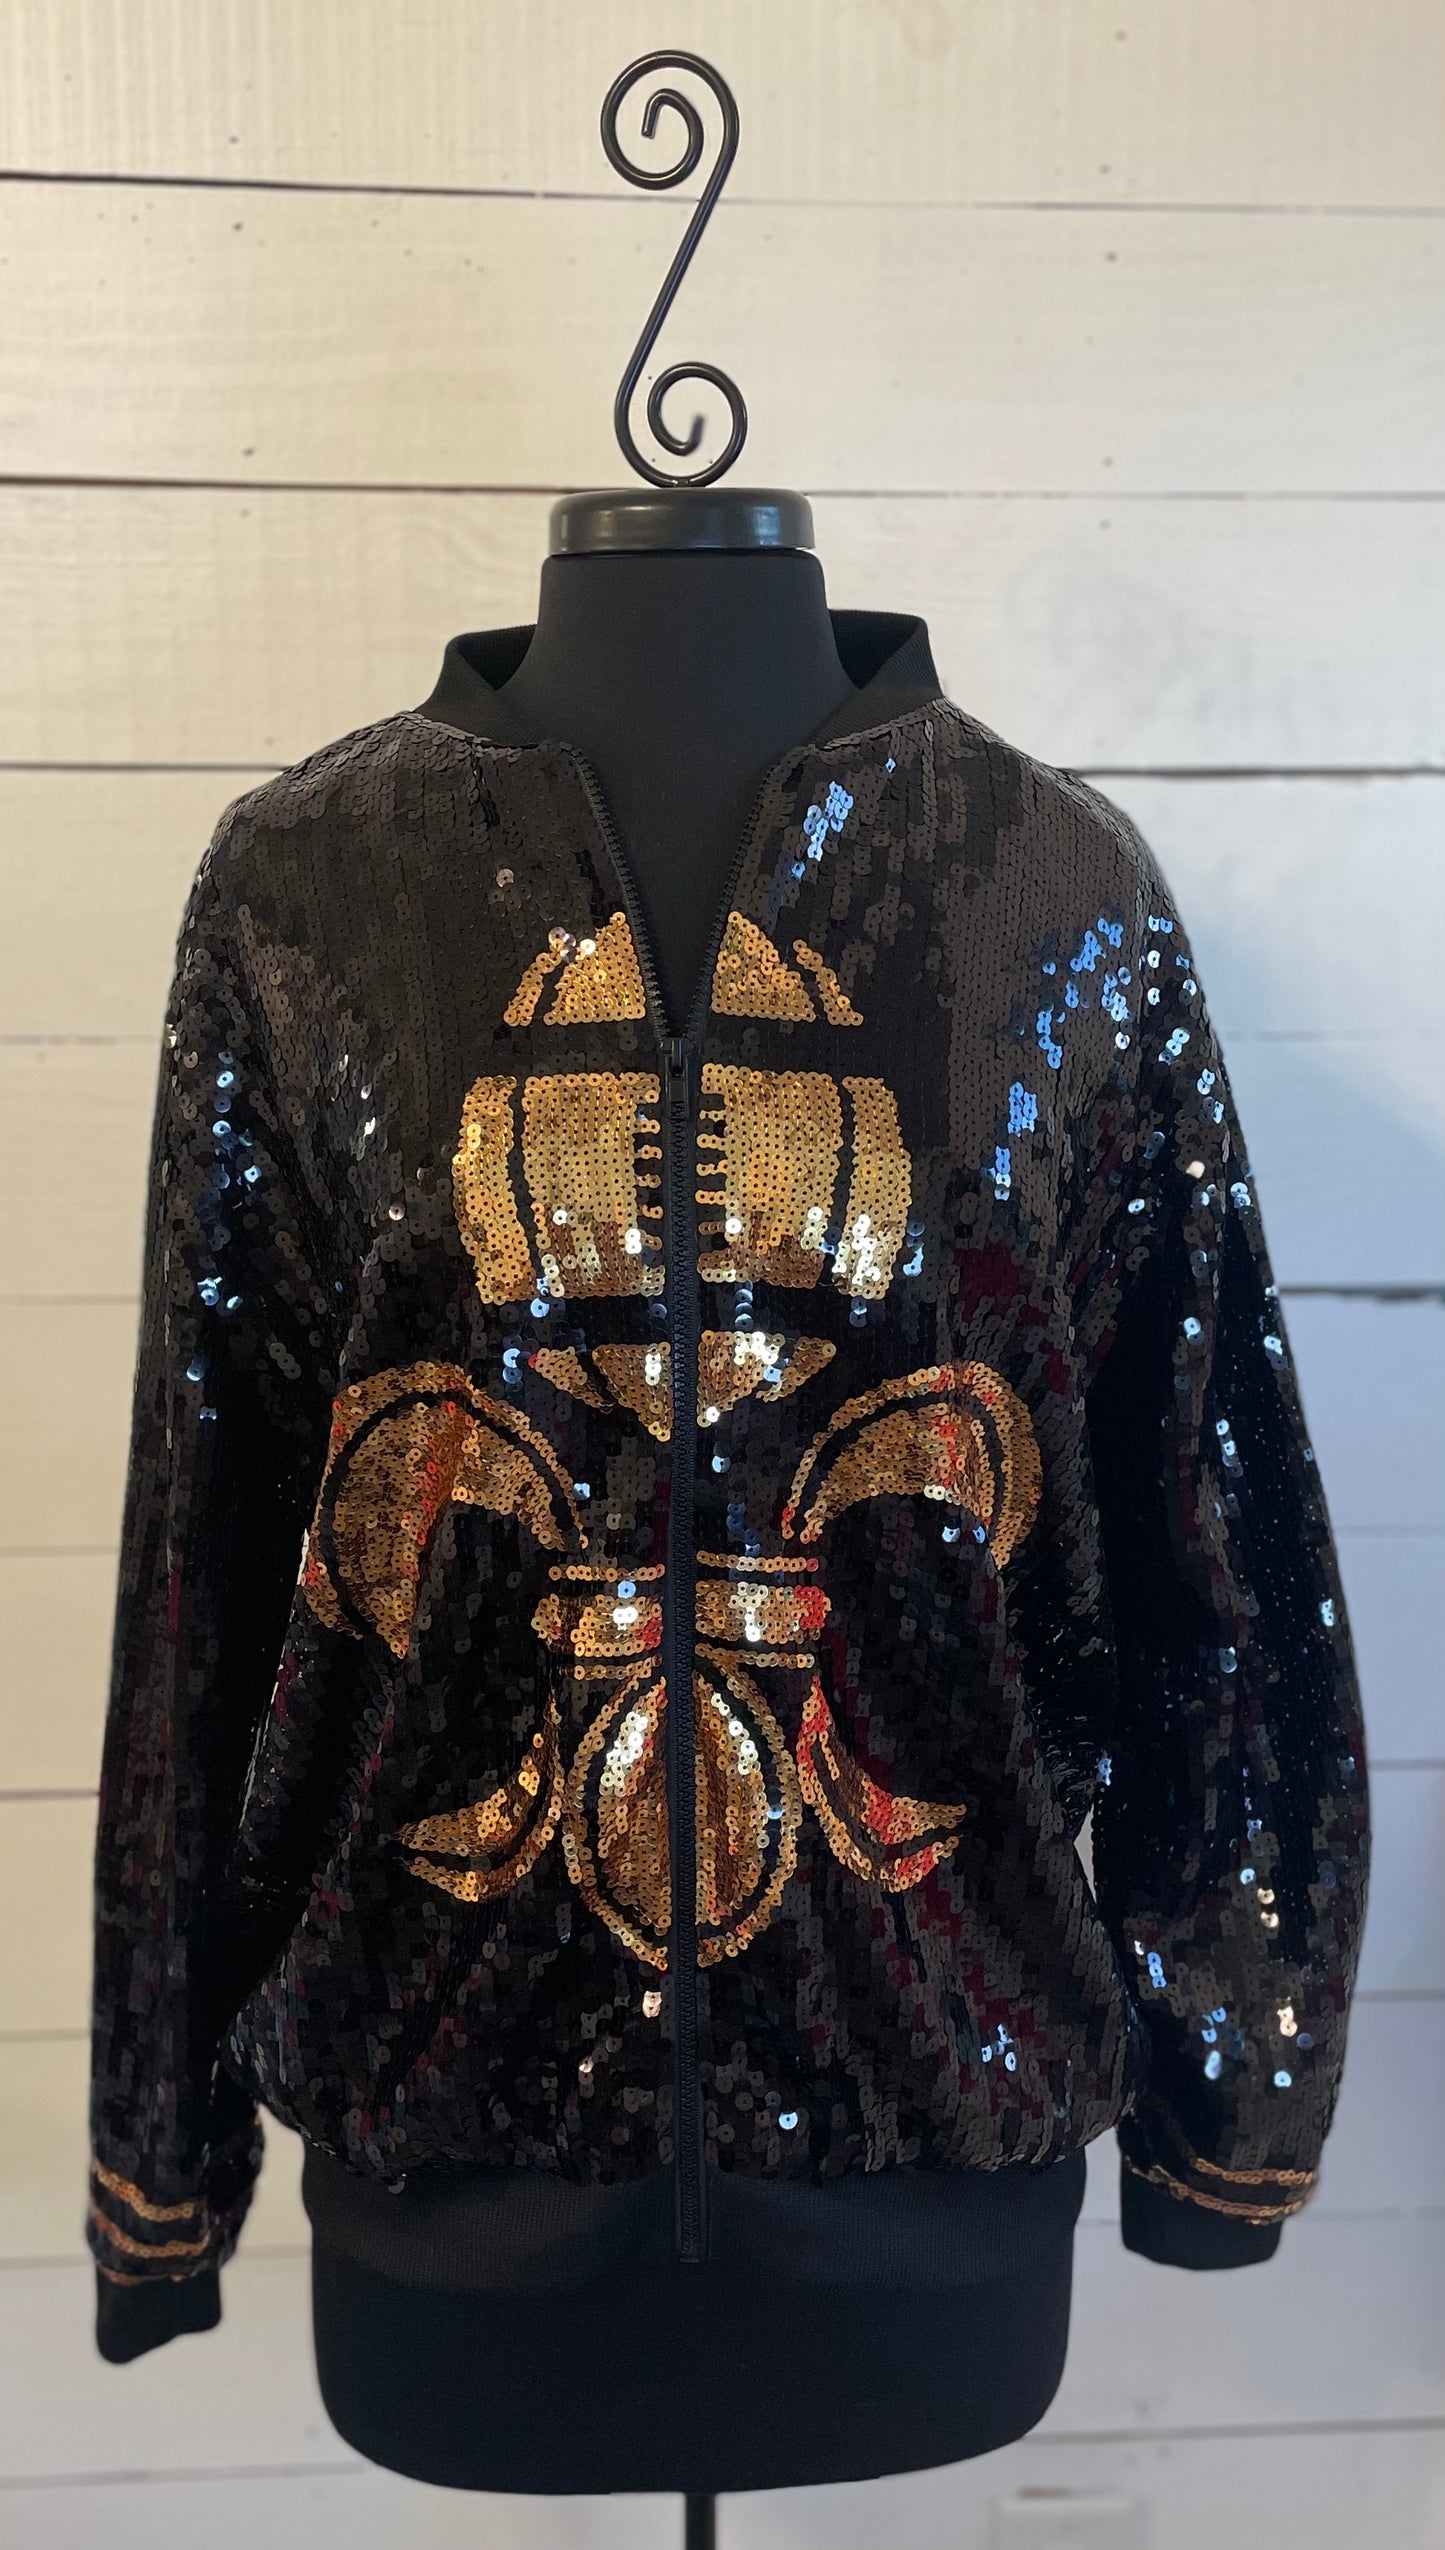 New Orleans Saints Jacket, Black and Gold Sequin Bomber Jacket, Game Day